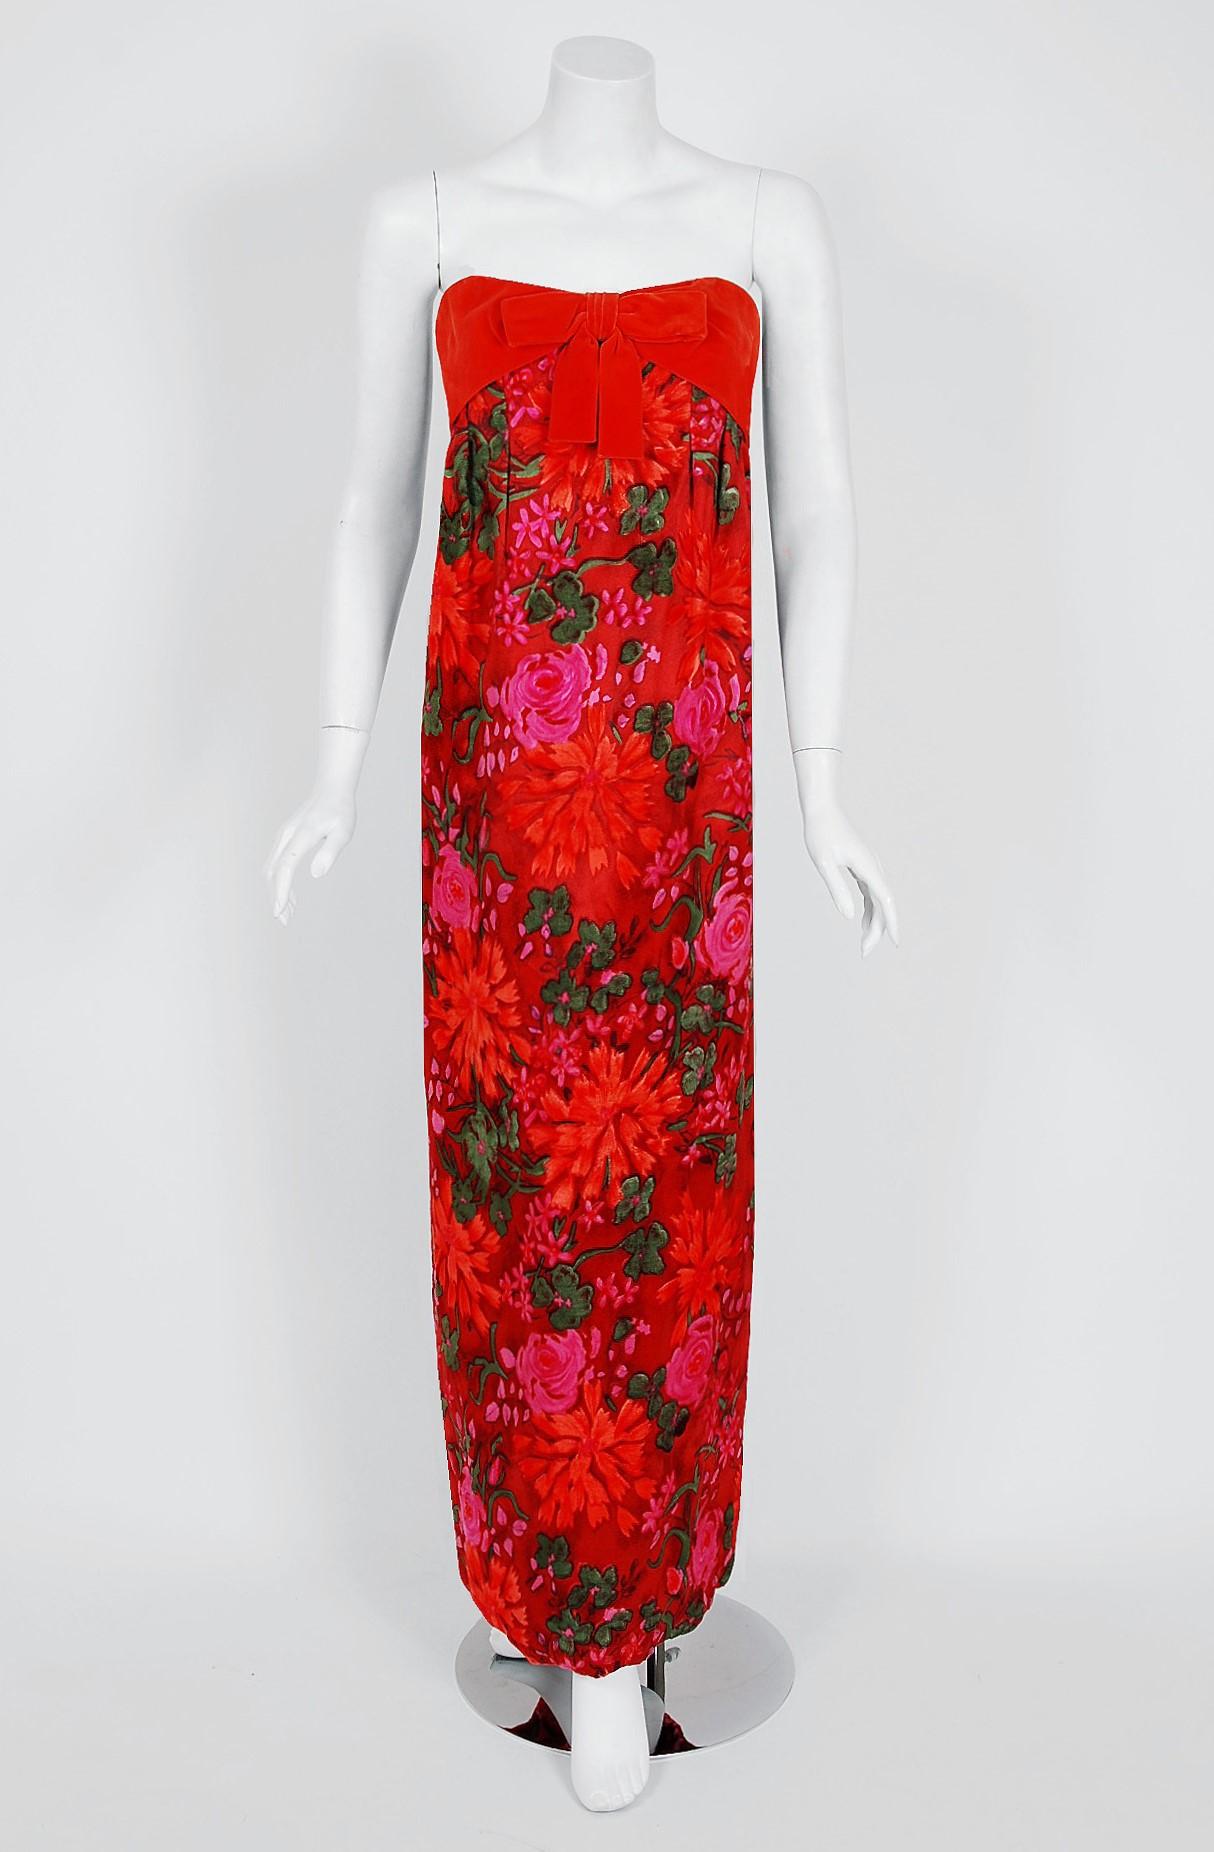 Breathtaking and ultra rare Bob Bugnand for Sam Friedlander designer dress dating back to the late 1960's. Bob Bugnand worked as the chief designer for Jacques Heim and Robert Piquet before opening his own couture workroom in Paris. This stunning